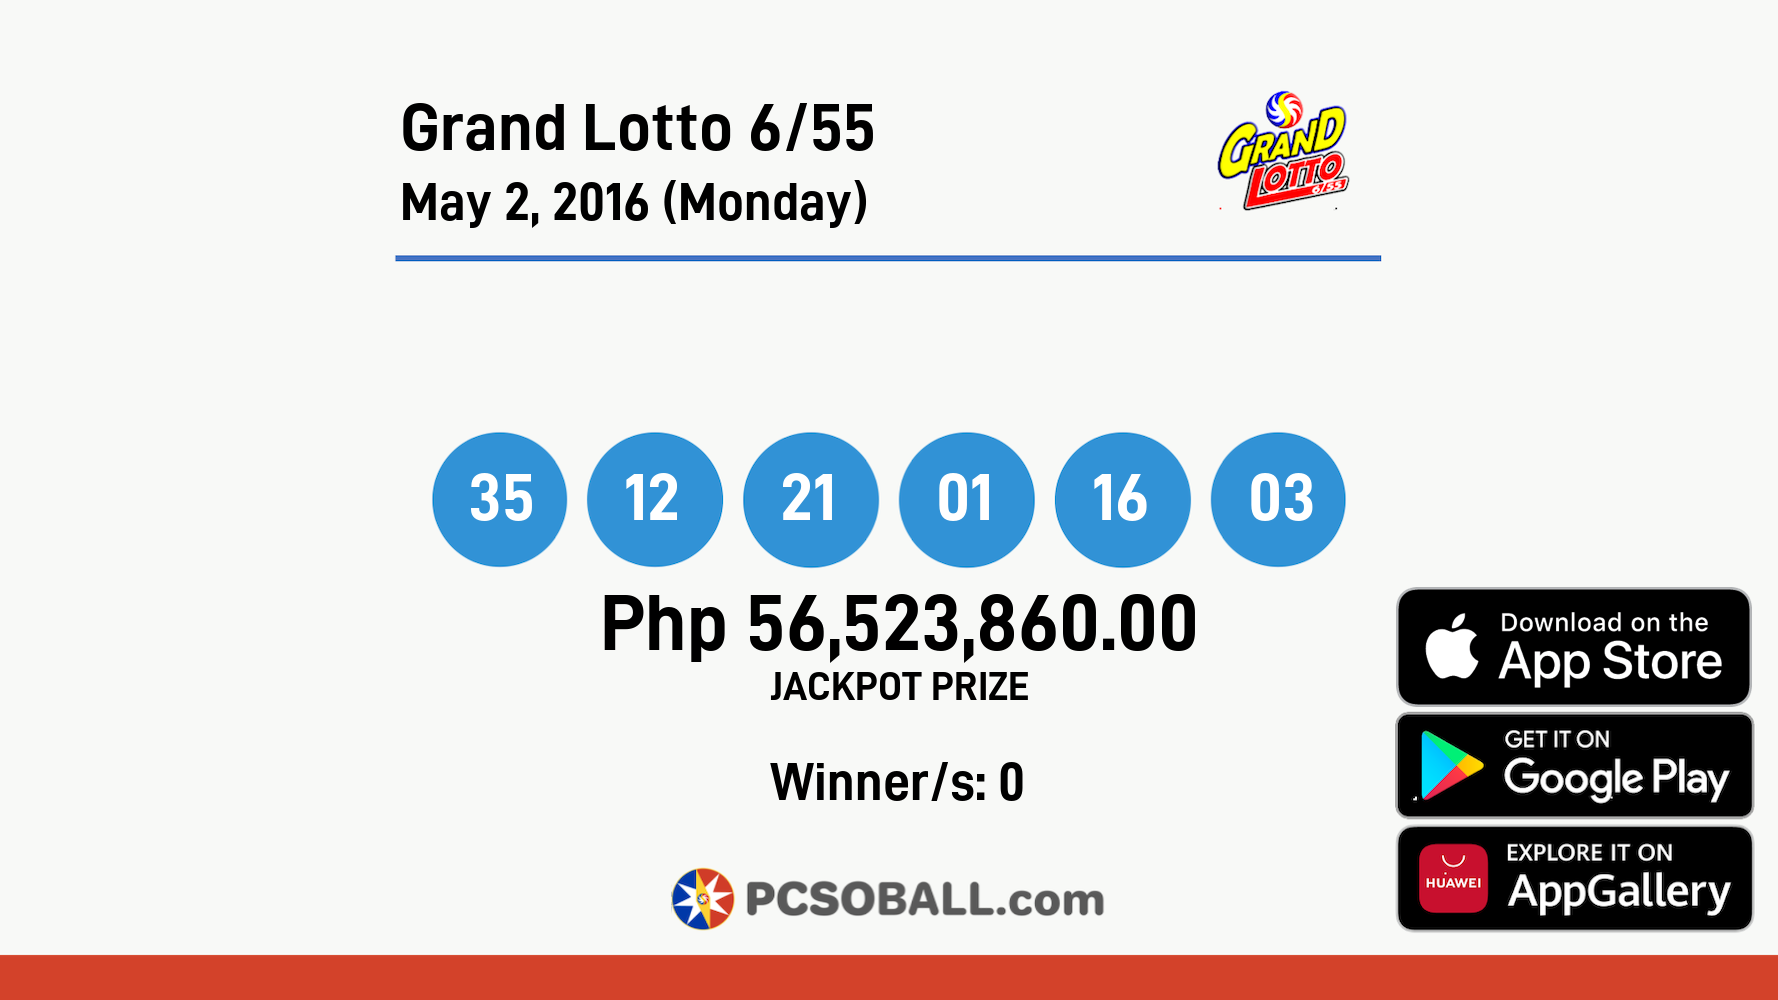 Grand Lotto 6/55 May 2, 2016 (Monday) Result